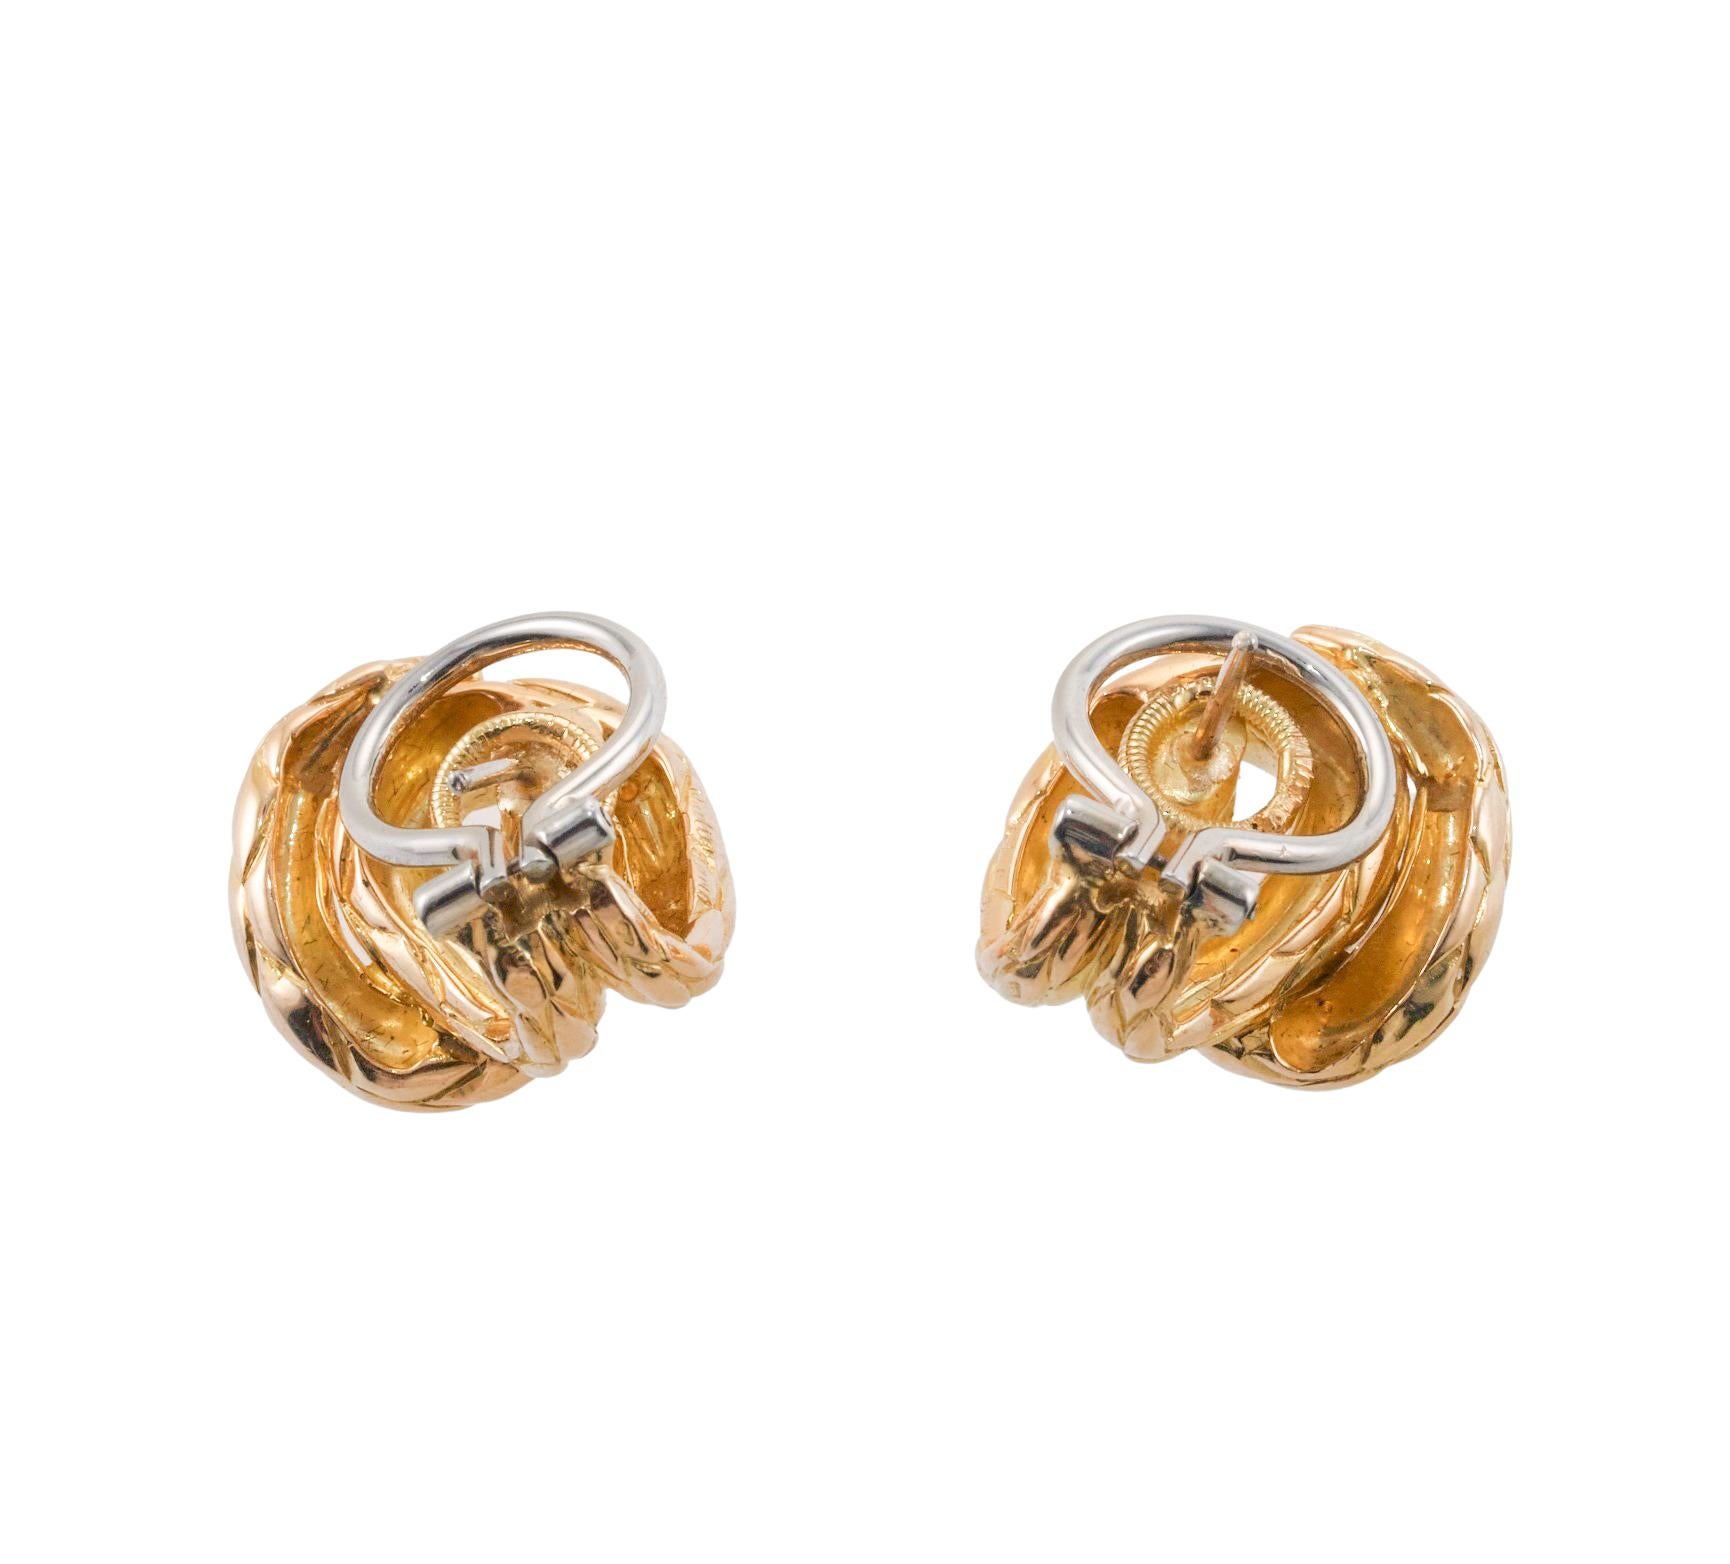 Cartier Paris Gold Interlocked Earrings In Excellent Condition For Sale In New York, NY